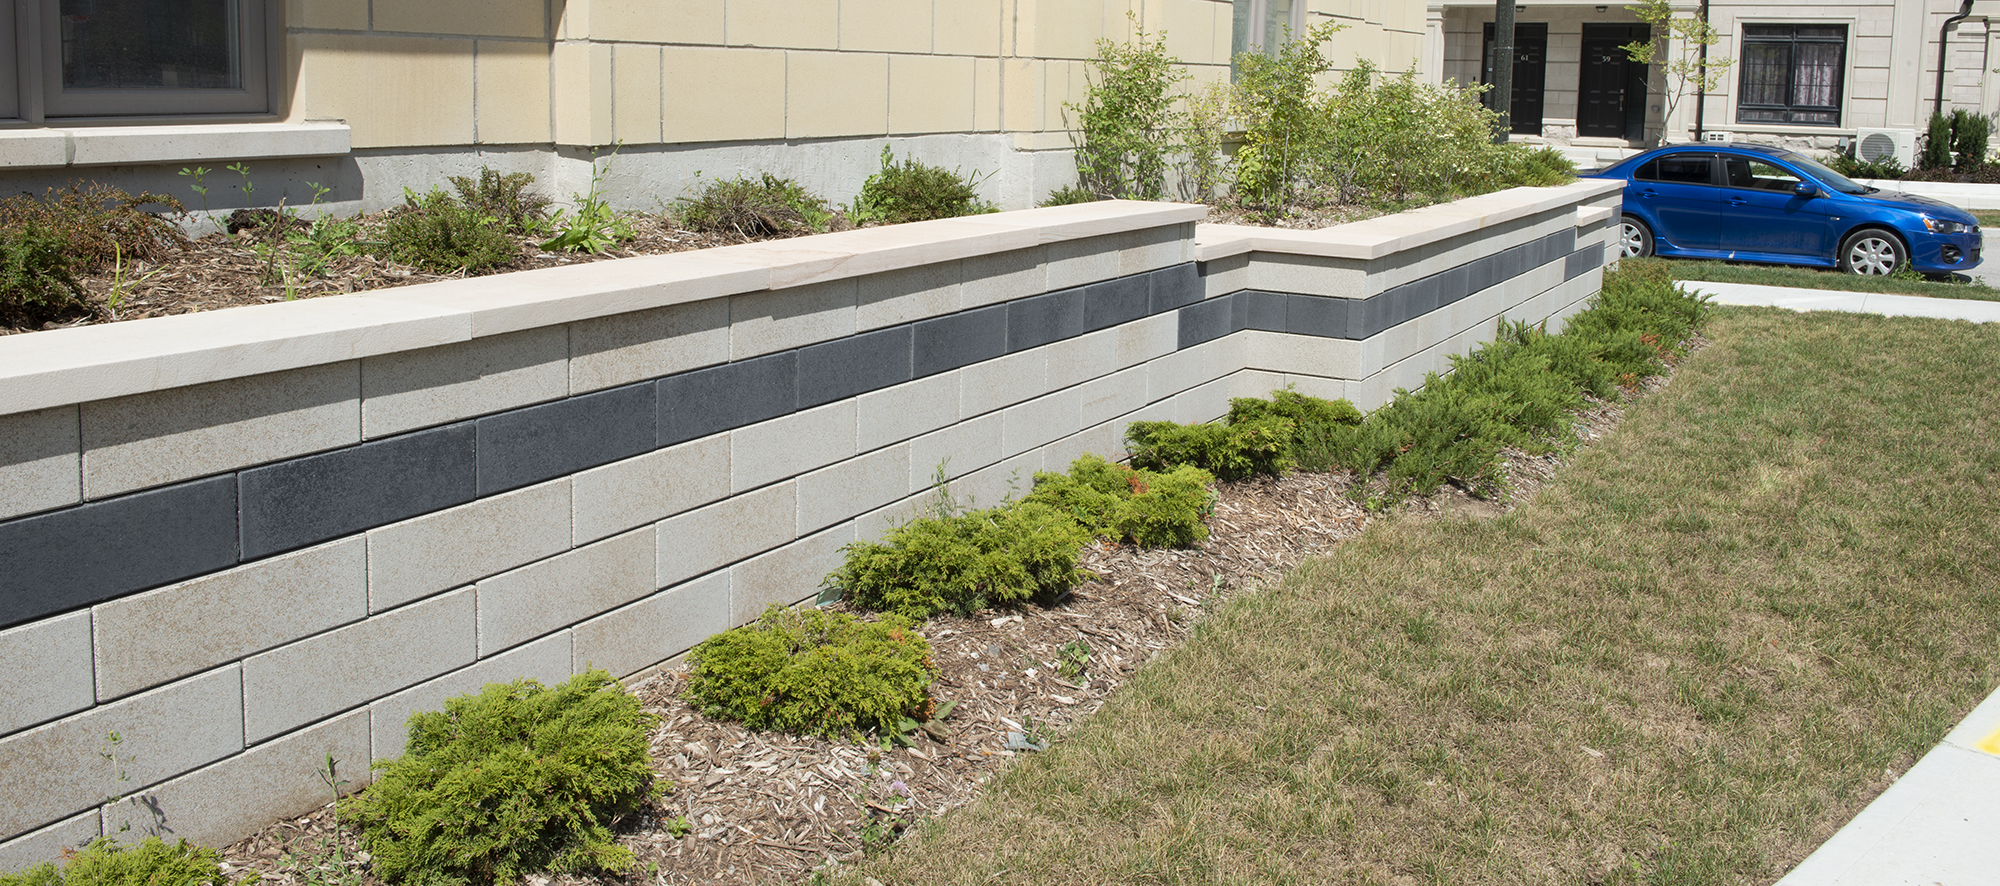 A two-toned U-Cara retaining wall provides multi-level garden beds featuring shrubbery along the side of the building.